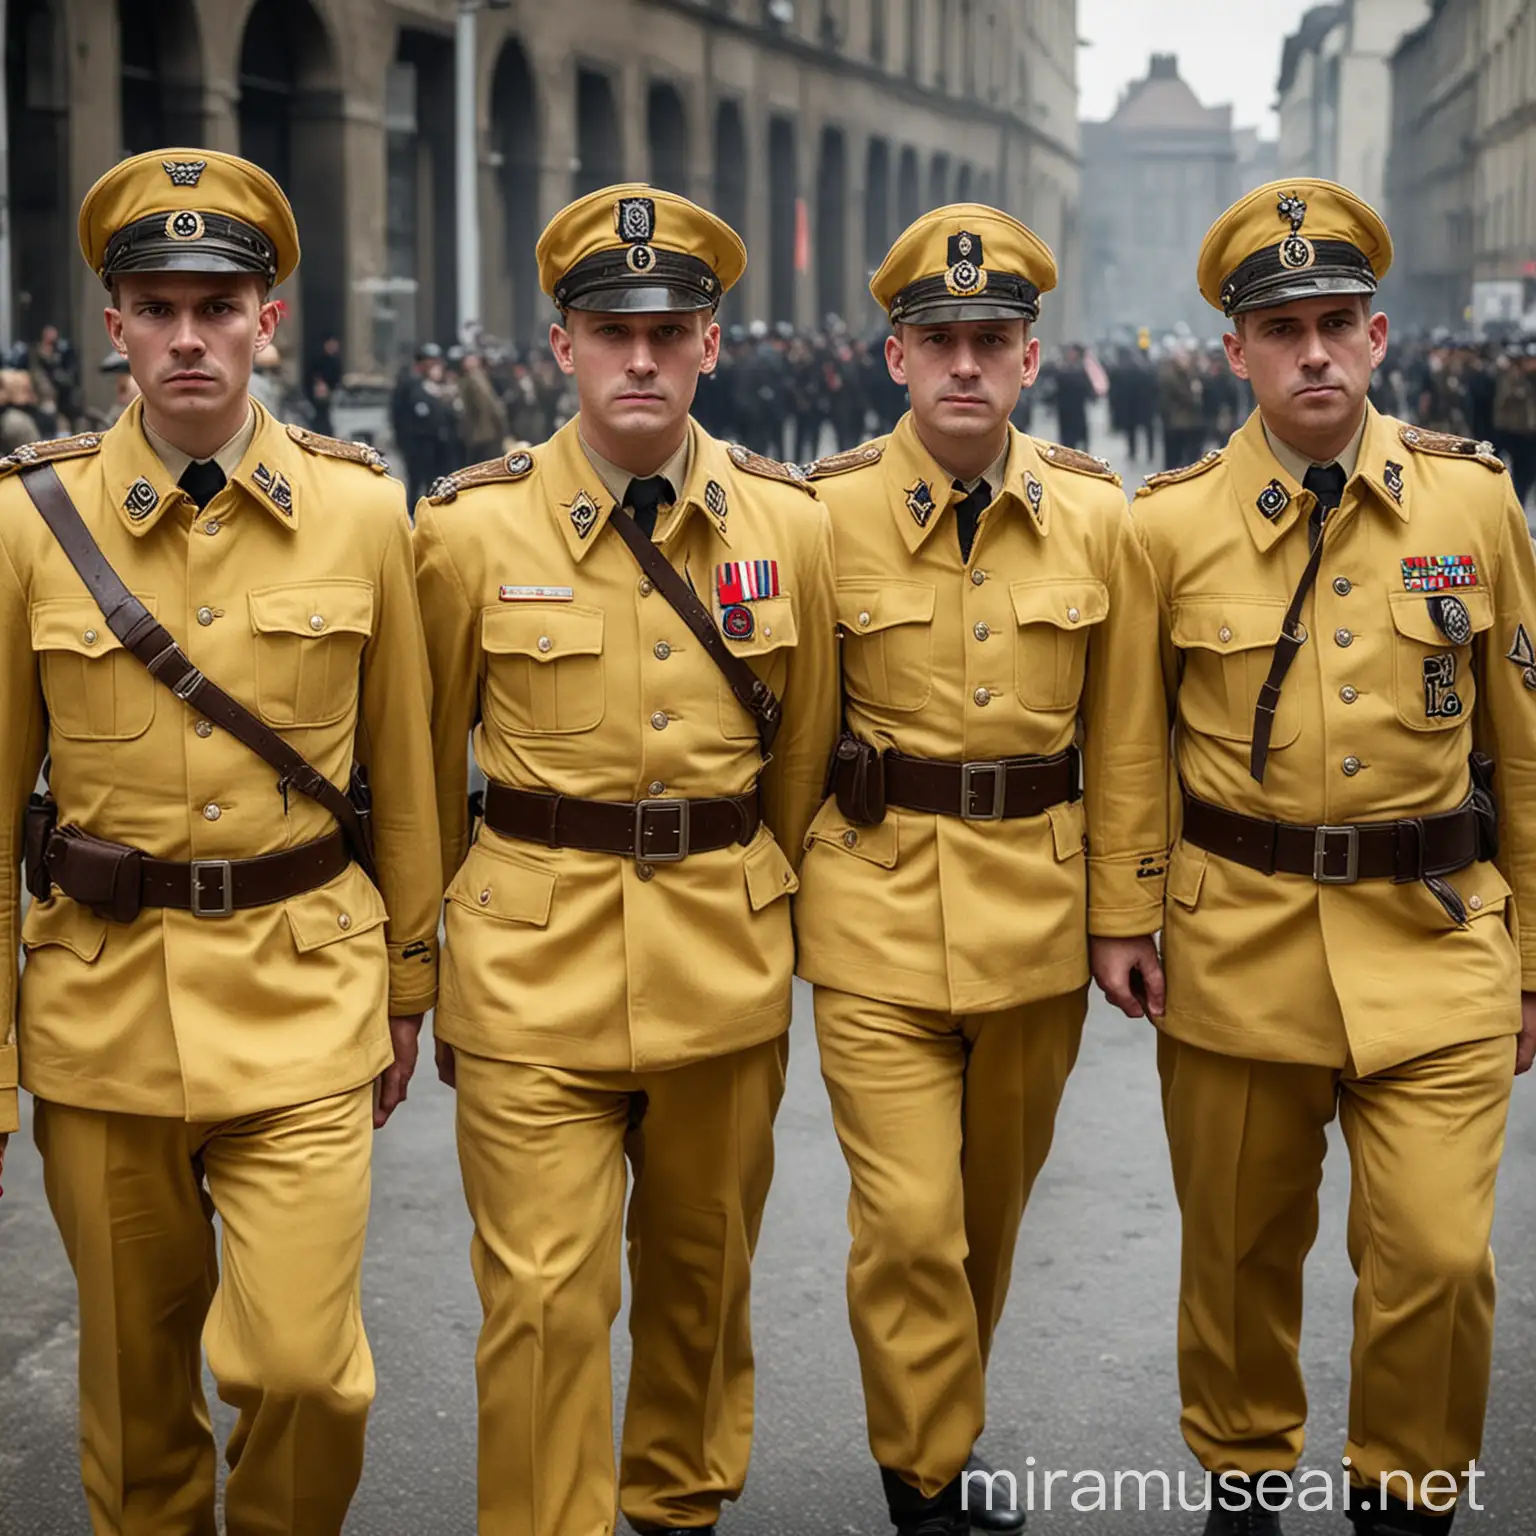 
Officers in yellow military uniforms resembling Nazi uniforms